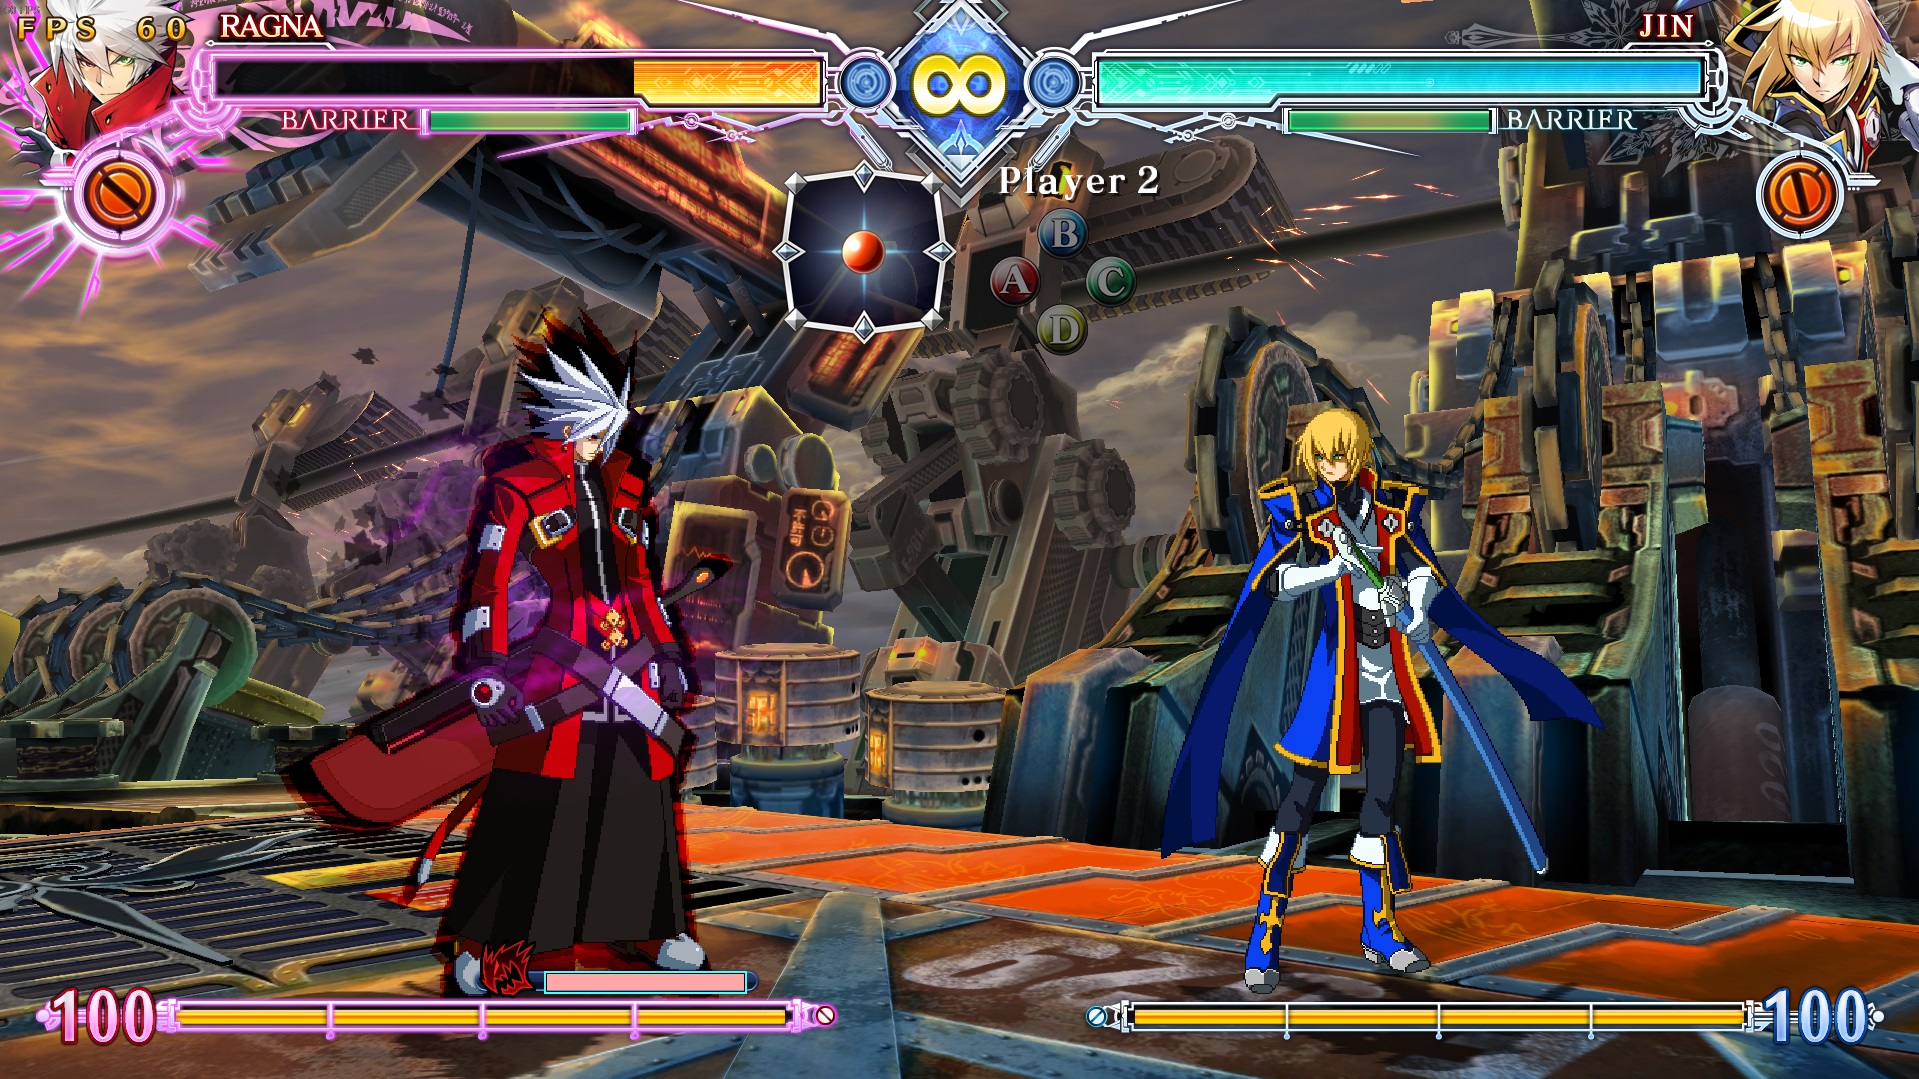 BlazBlue Centralfiction - How to Play Unlimited Characters Using Cheat Engine - Enabling/disabling Unlimited characters and other details (Offline) - 49DE0F5